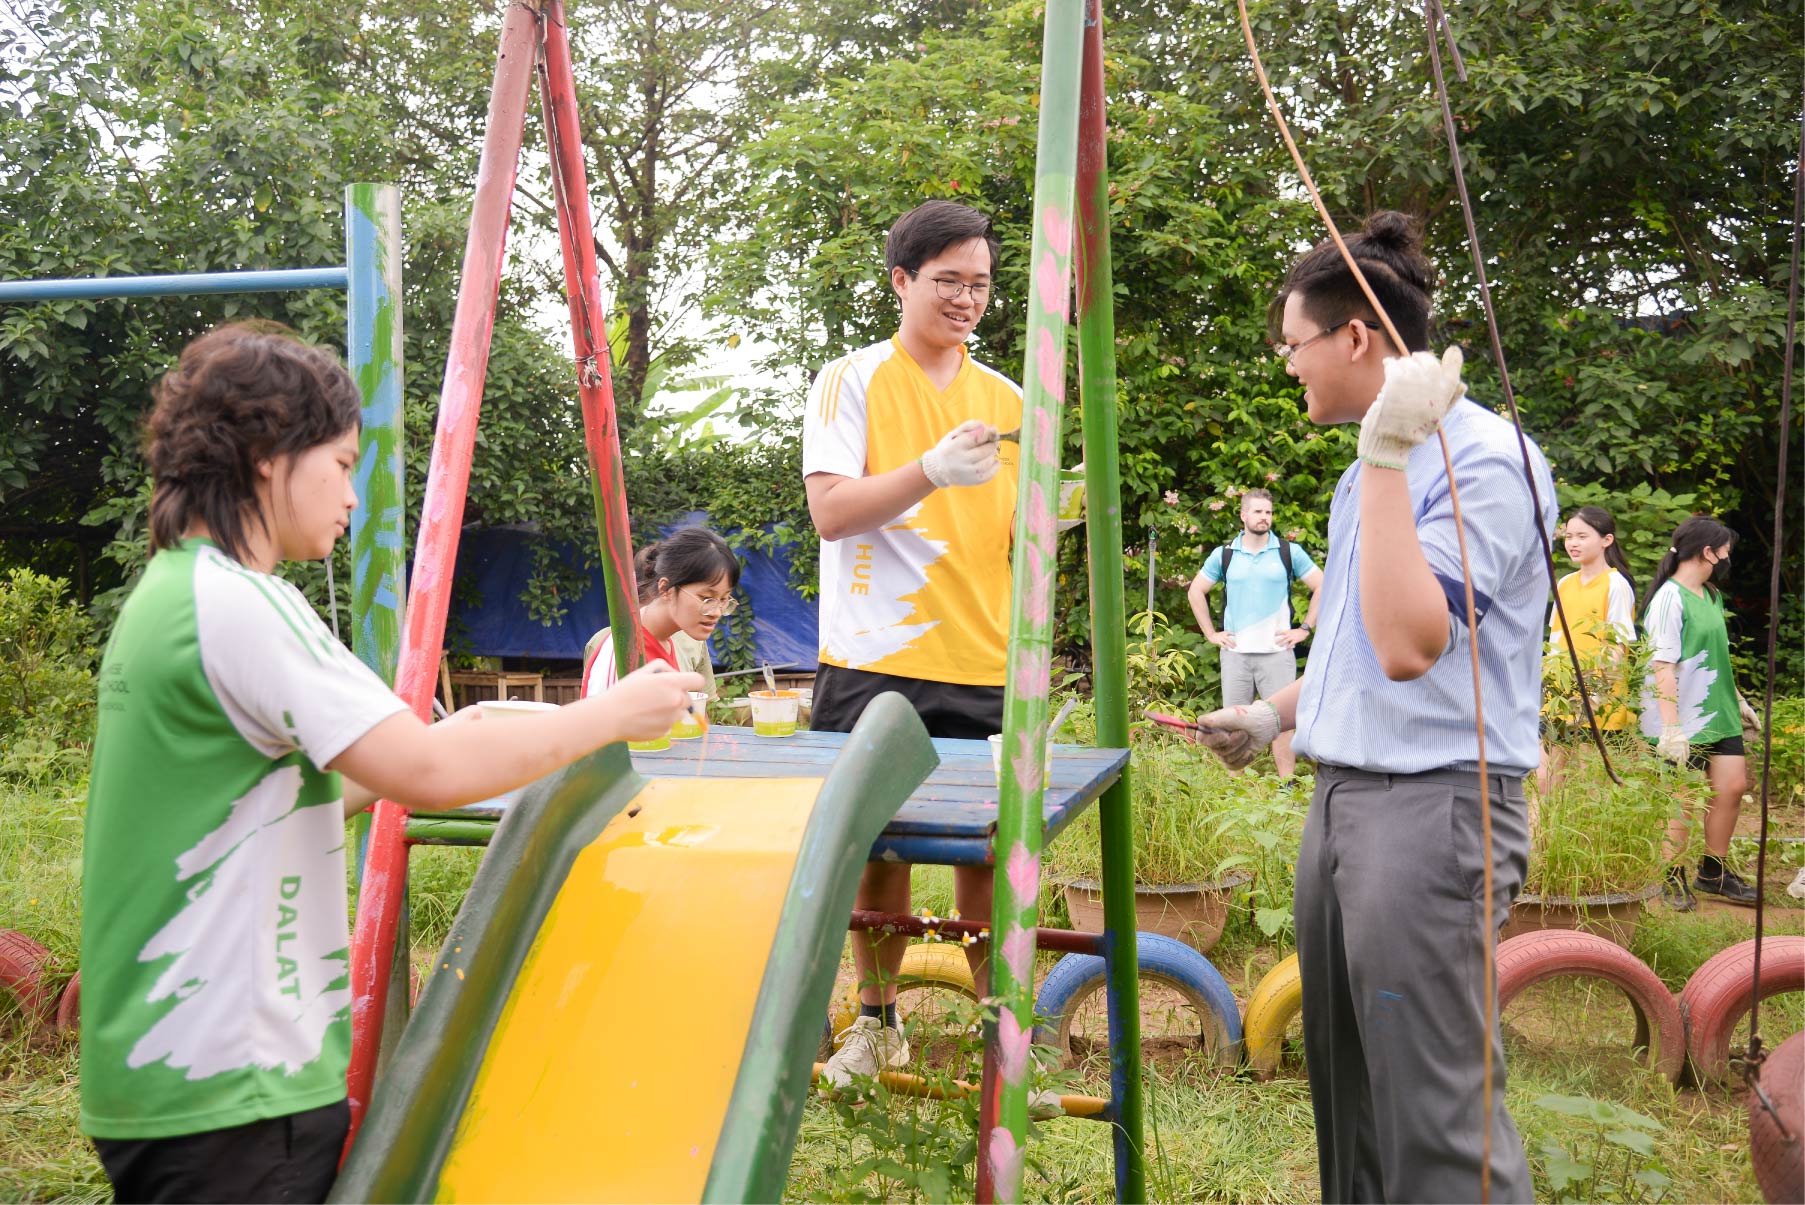 BVIS Hanoi students actively participated in building and renovating the playground in the local floating village, enhancing the area's landscape and enriching community life.